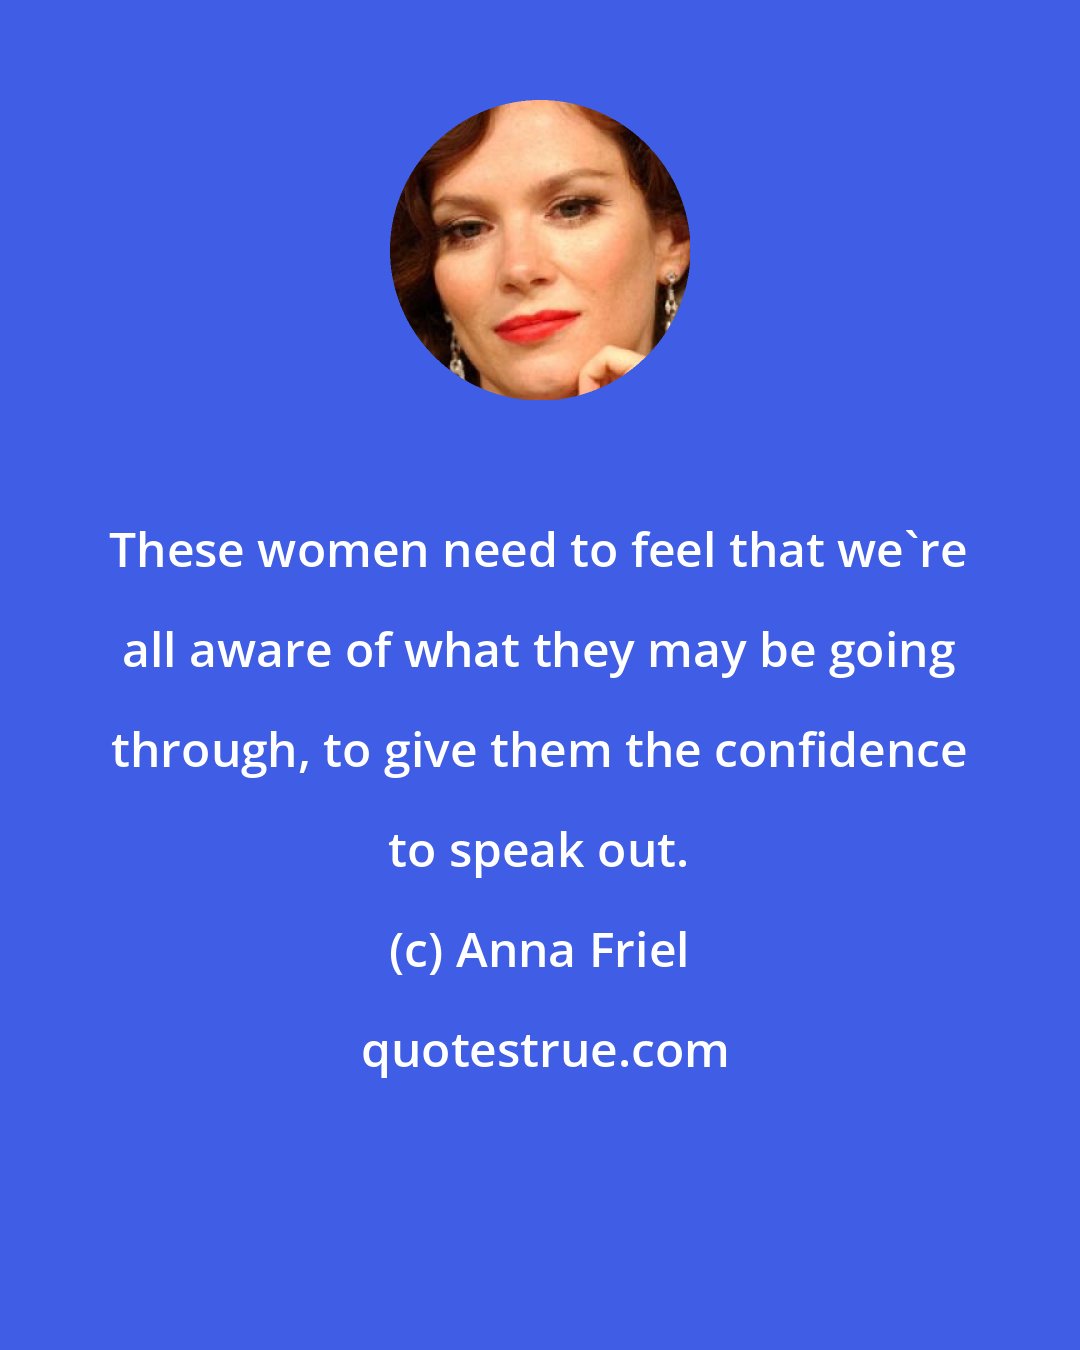 Anna Friel: These women need to feel that we're all aware of what they may be going through, to give them the confidence to speak out.